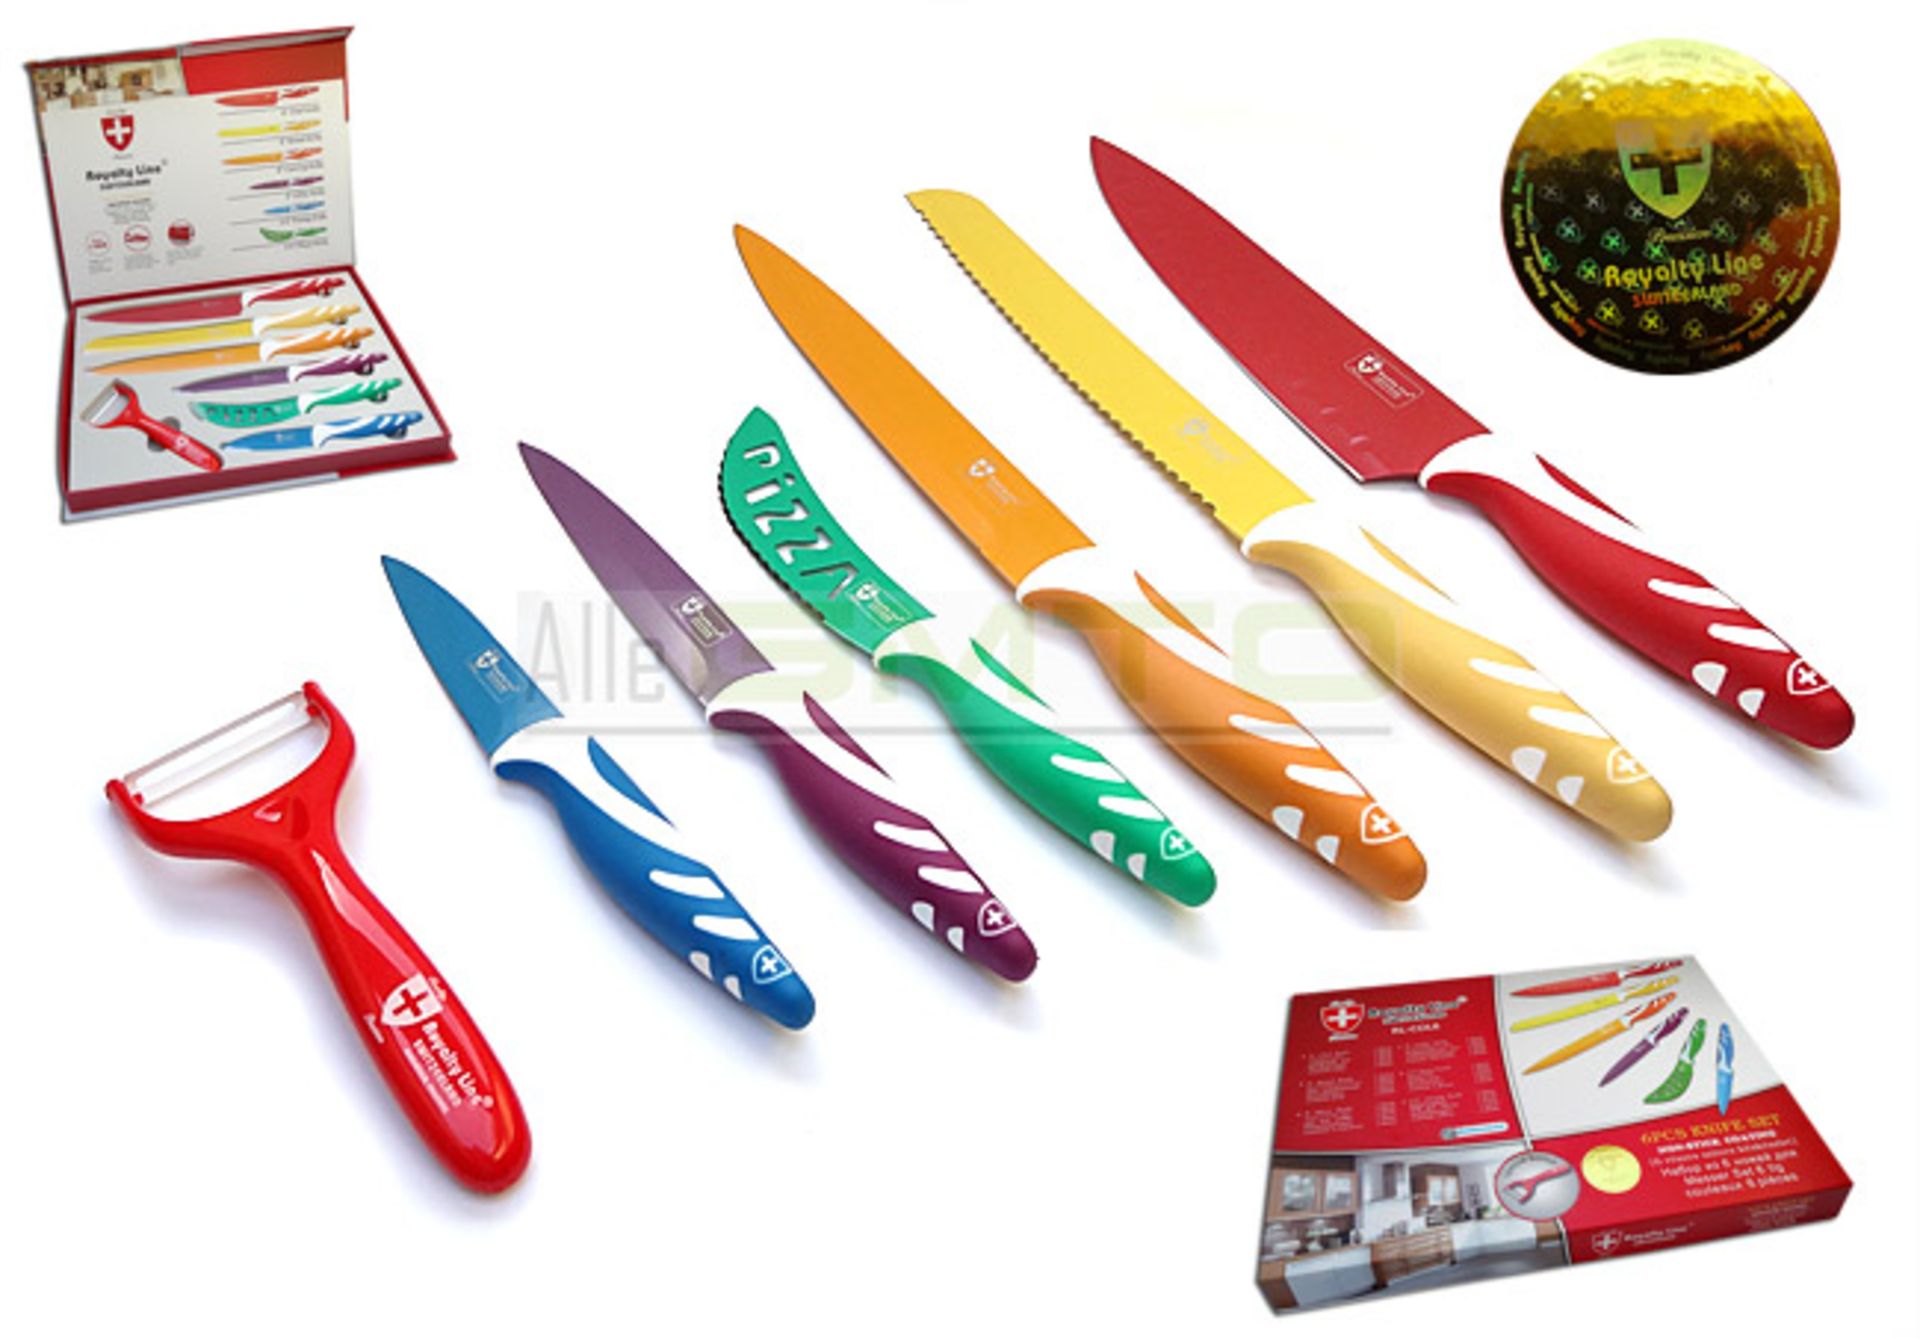 V  Grade A 7 Piece Non-Stick Multi Coloured Knife Set RRP99.00 Euros (Handle pattern varies from